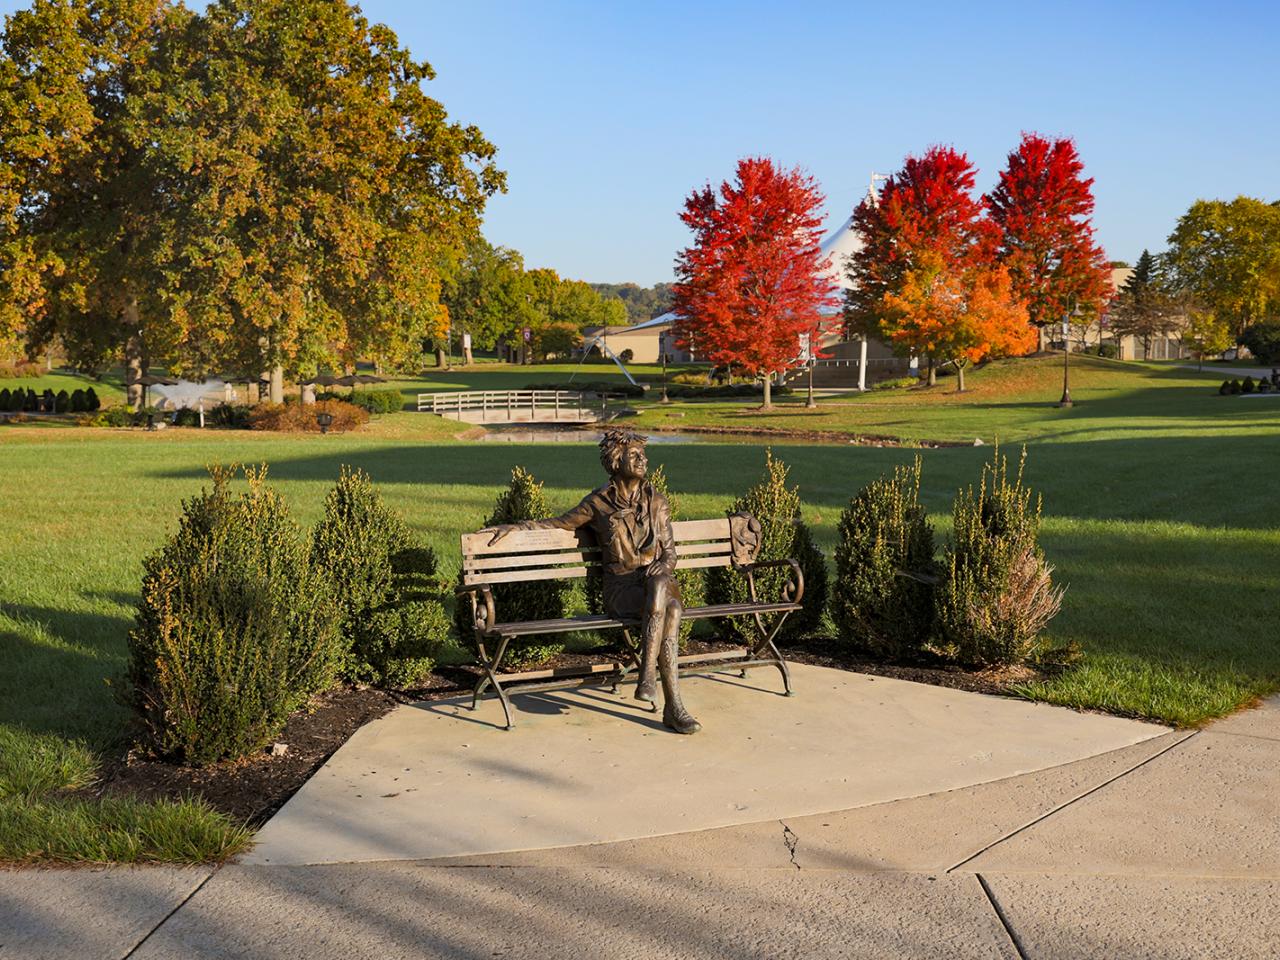 A bronze statue of Amelia Earhart seated on a bench. 